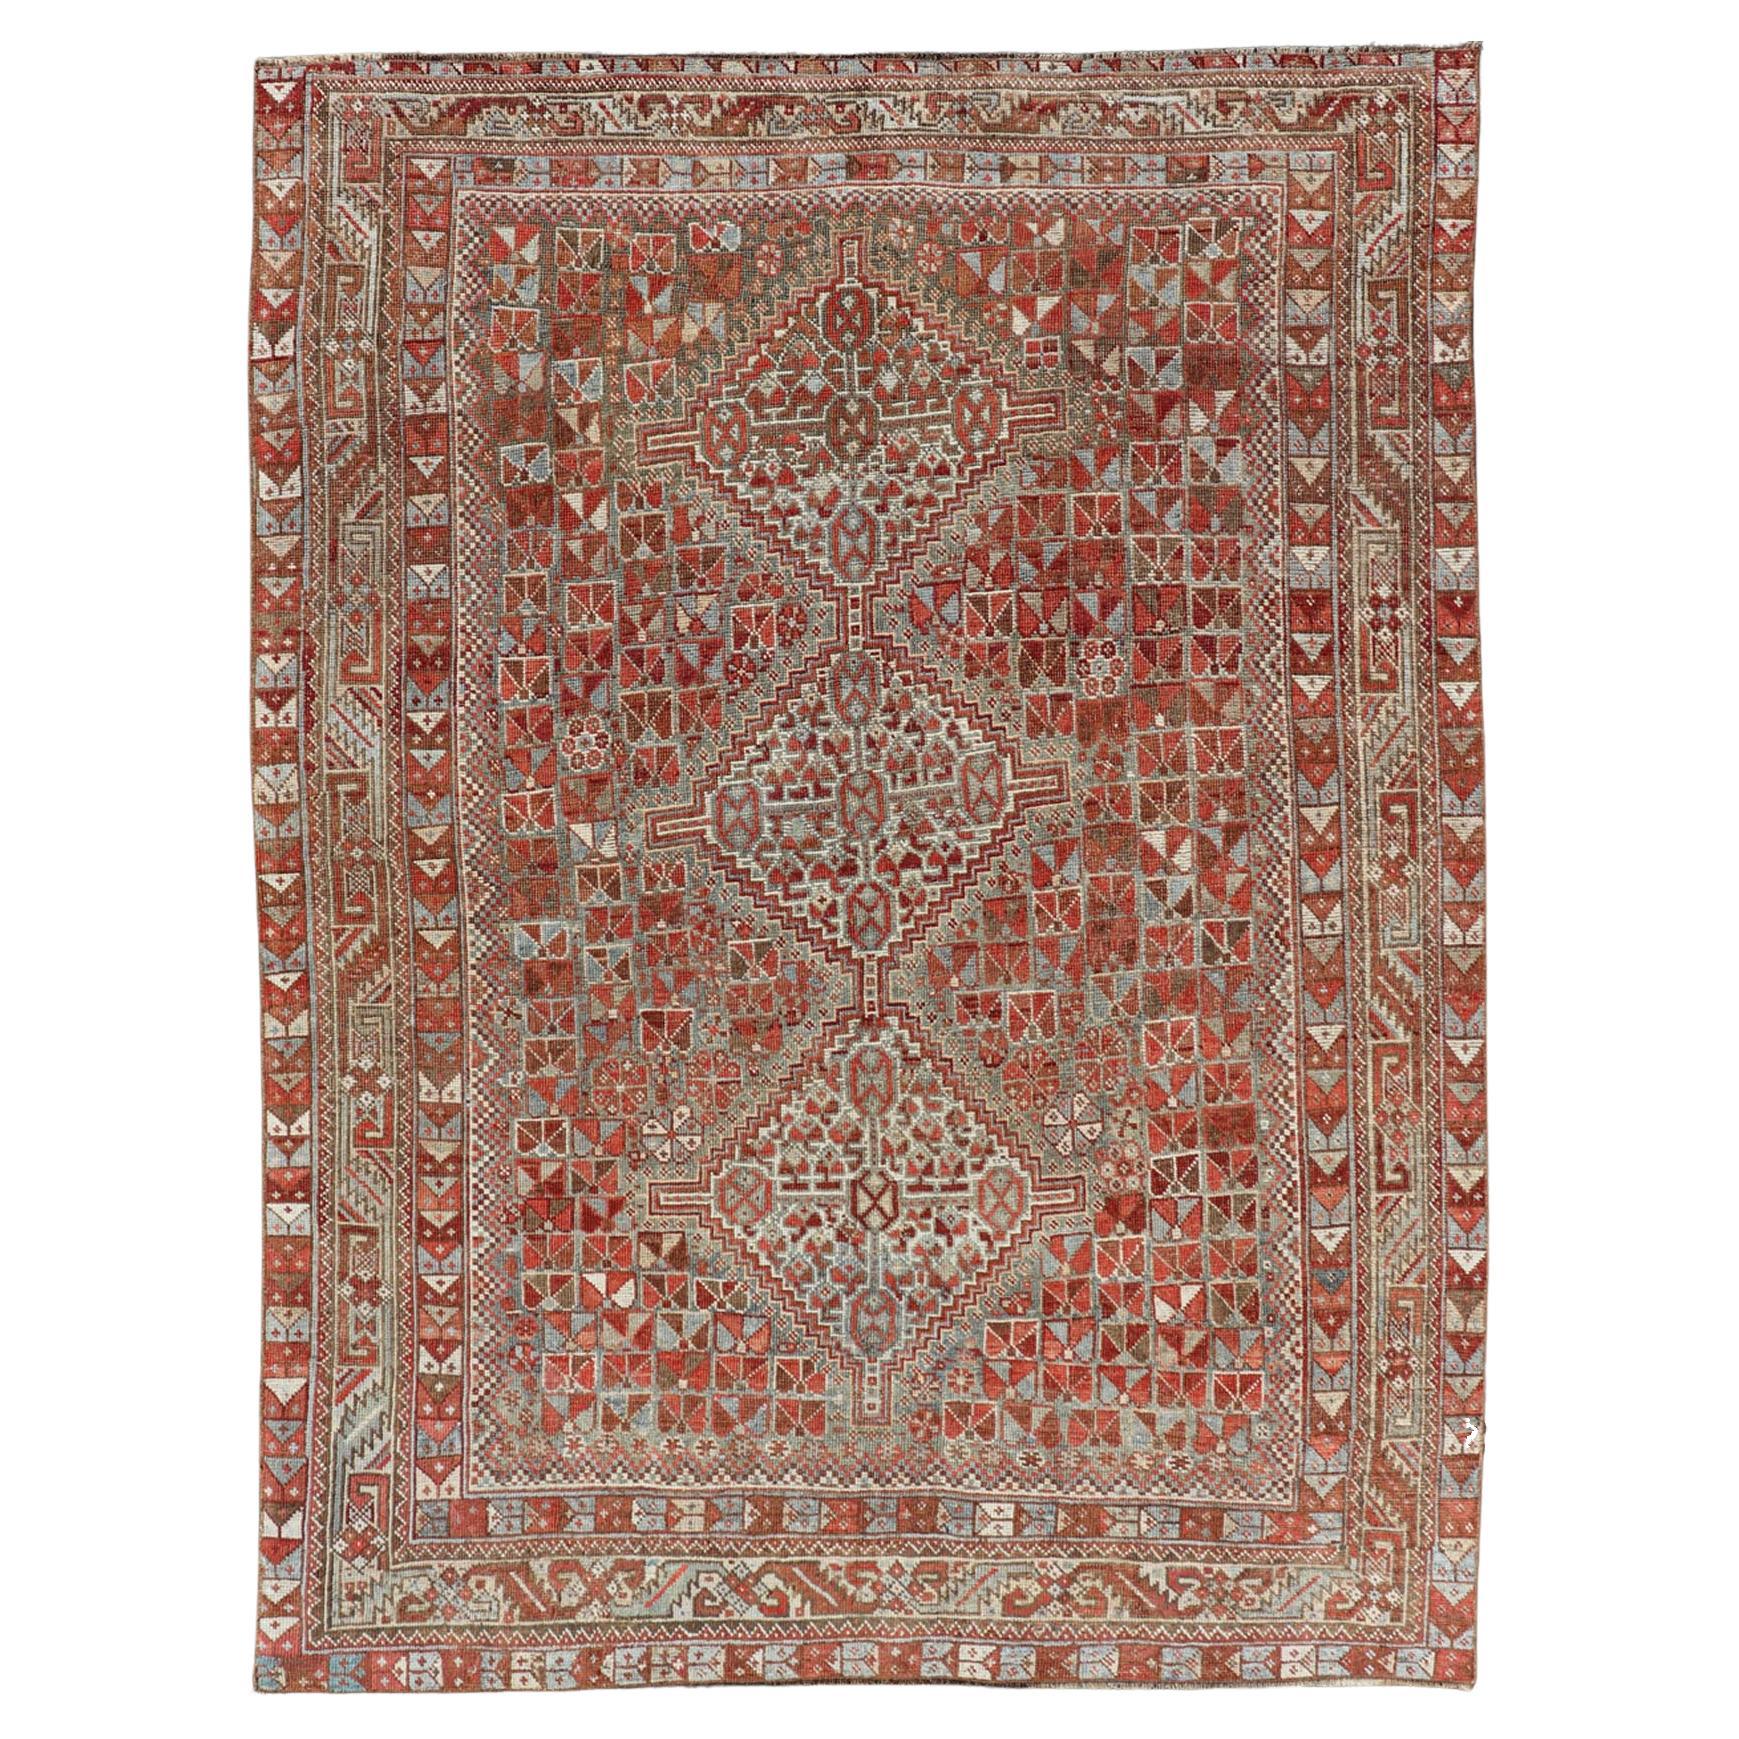 Antique Distressed Persian Medallion Shiraz Rug in Shades Rusty Red & Steel Blue For Sale